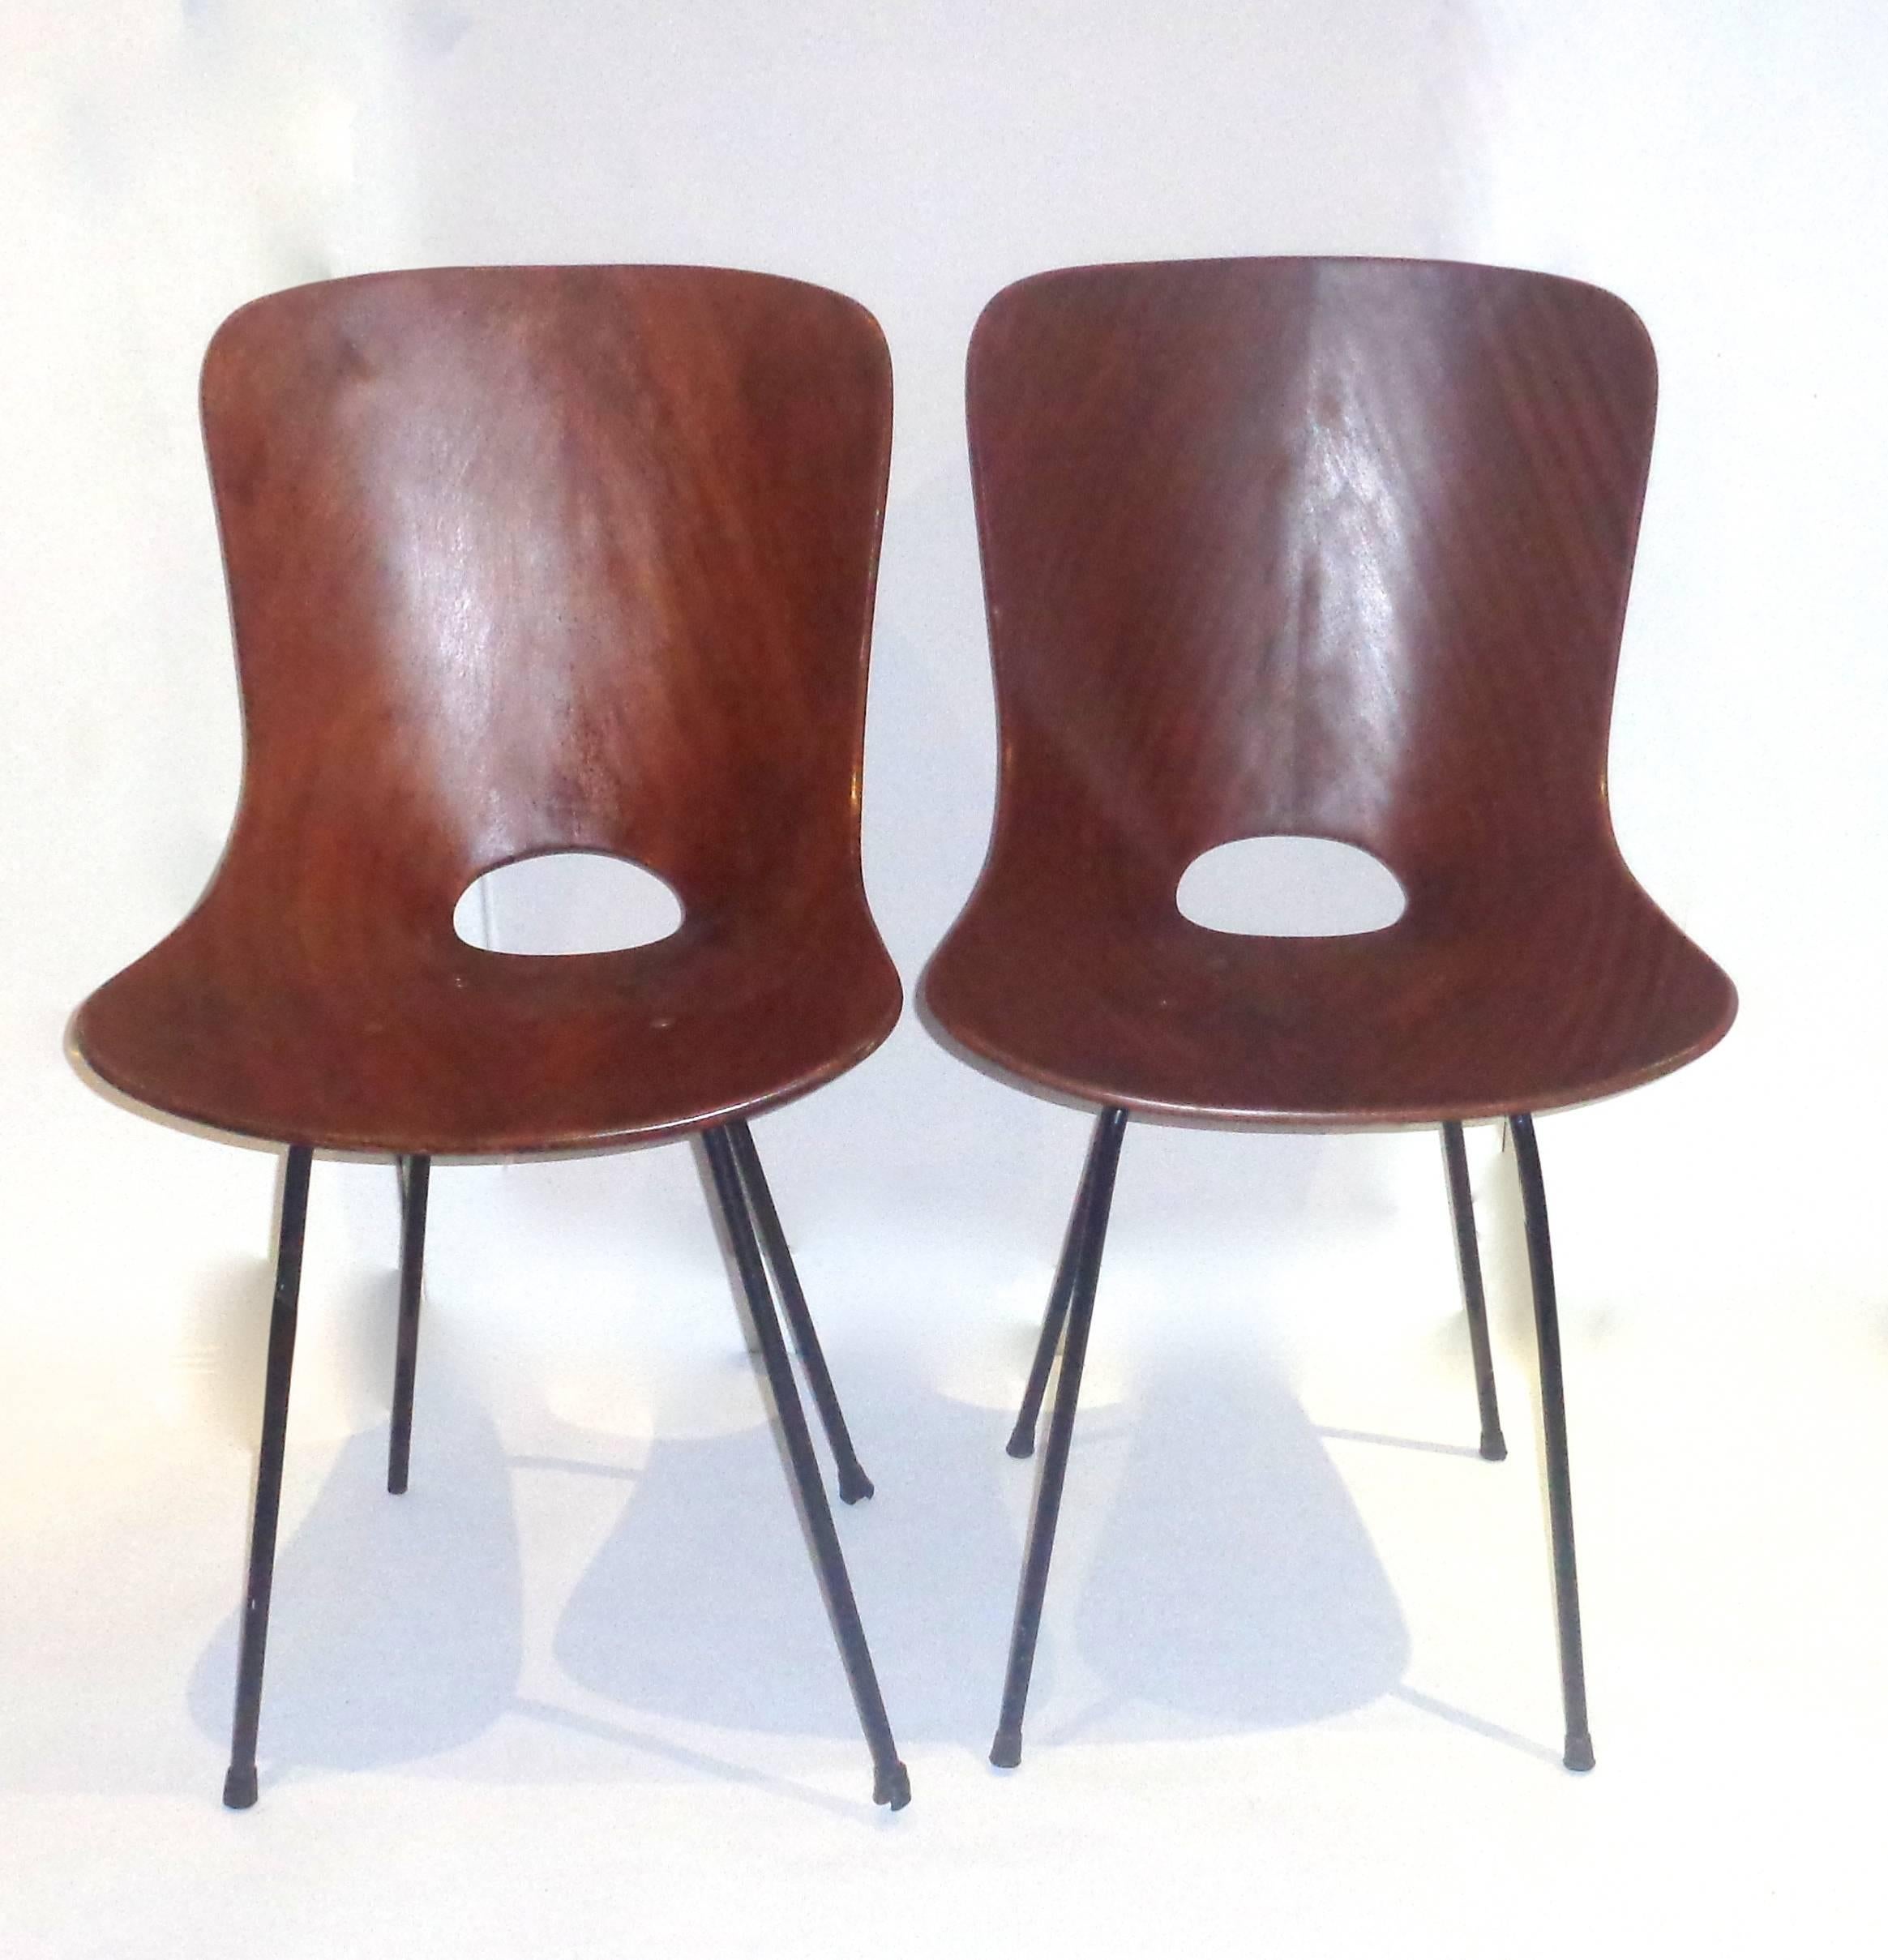 A rare pair of Variante chairs. The famous Medea Chair of Vittorio Nobili which was designed in 1955 and won the prestigious Compasso D'oro award in the following year has a sister chair which Nobili named the Variante. 
These plywood chairs have a